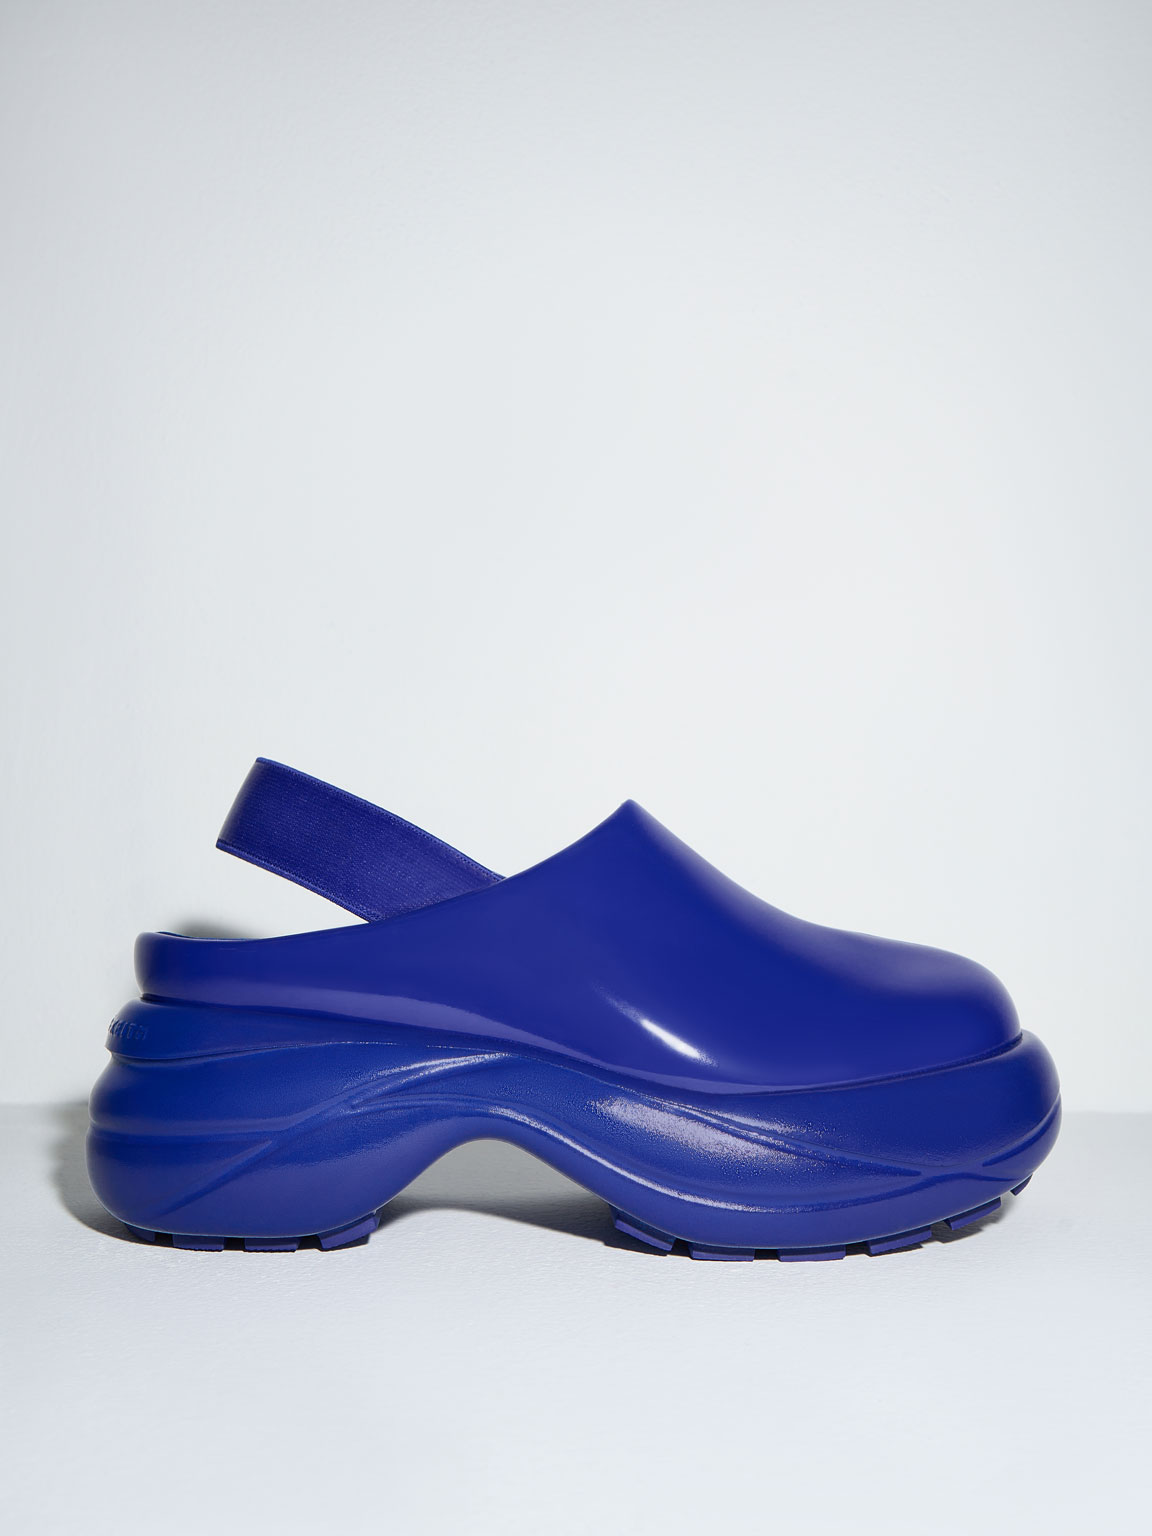 Blue Roony Patent Back-Strap Flats - CHARLES & KEITH UK